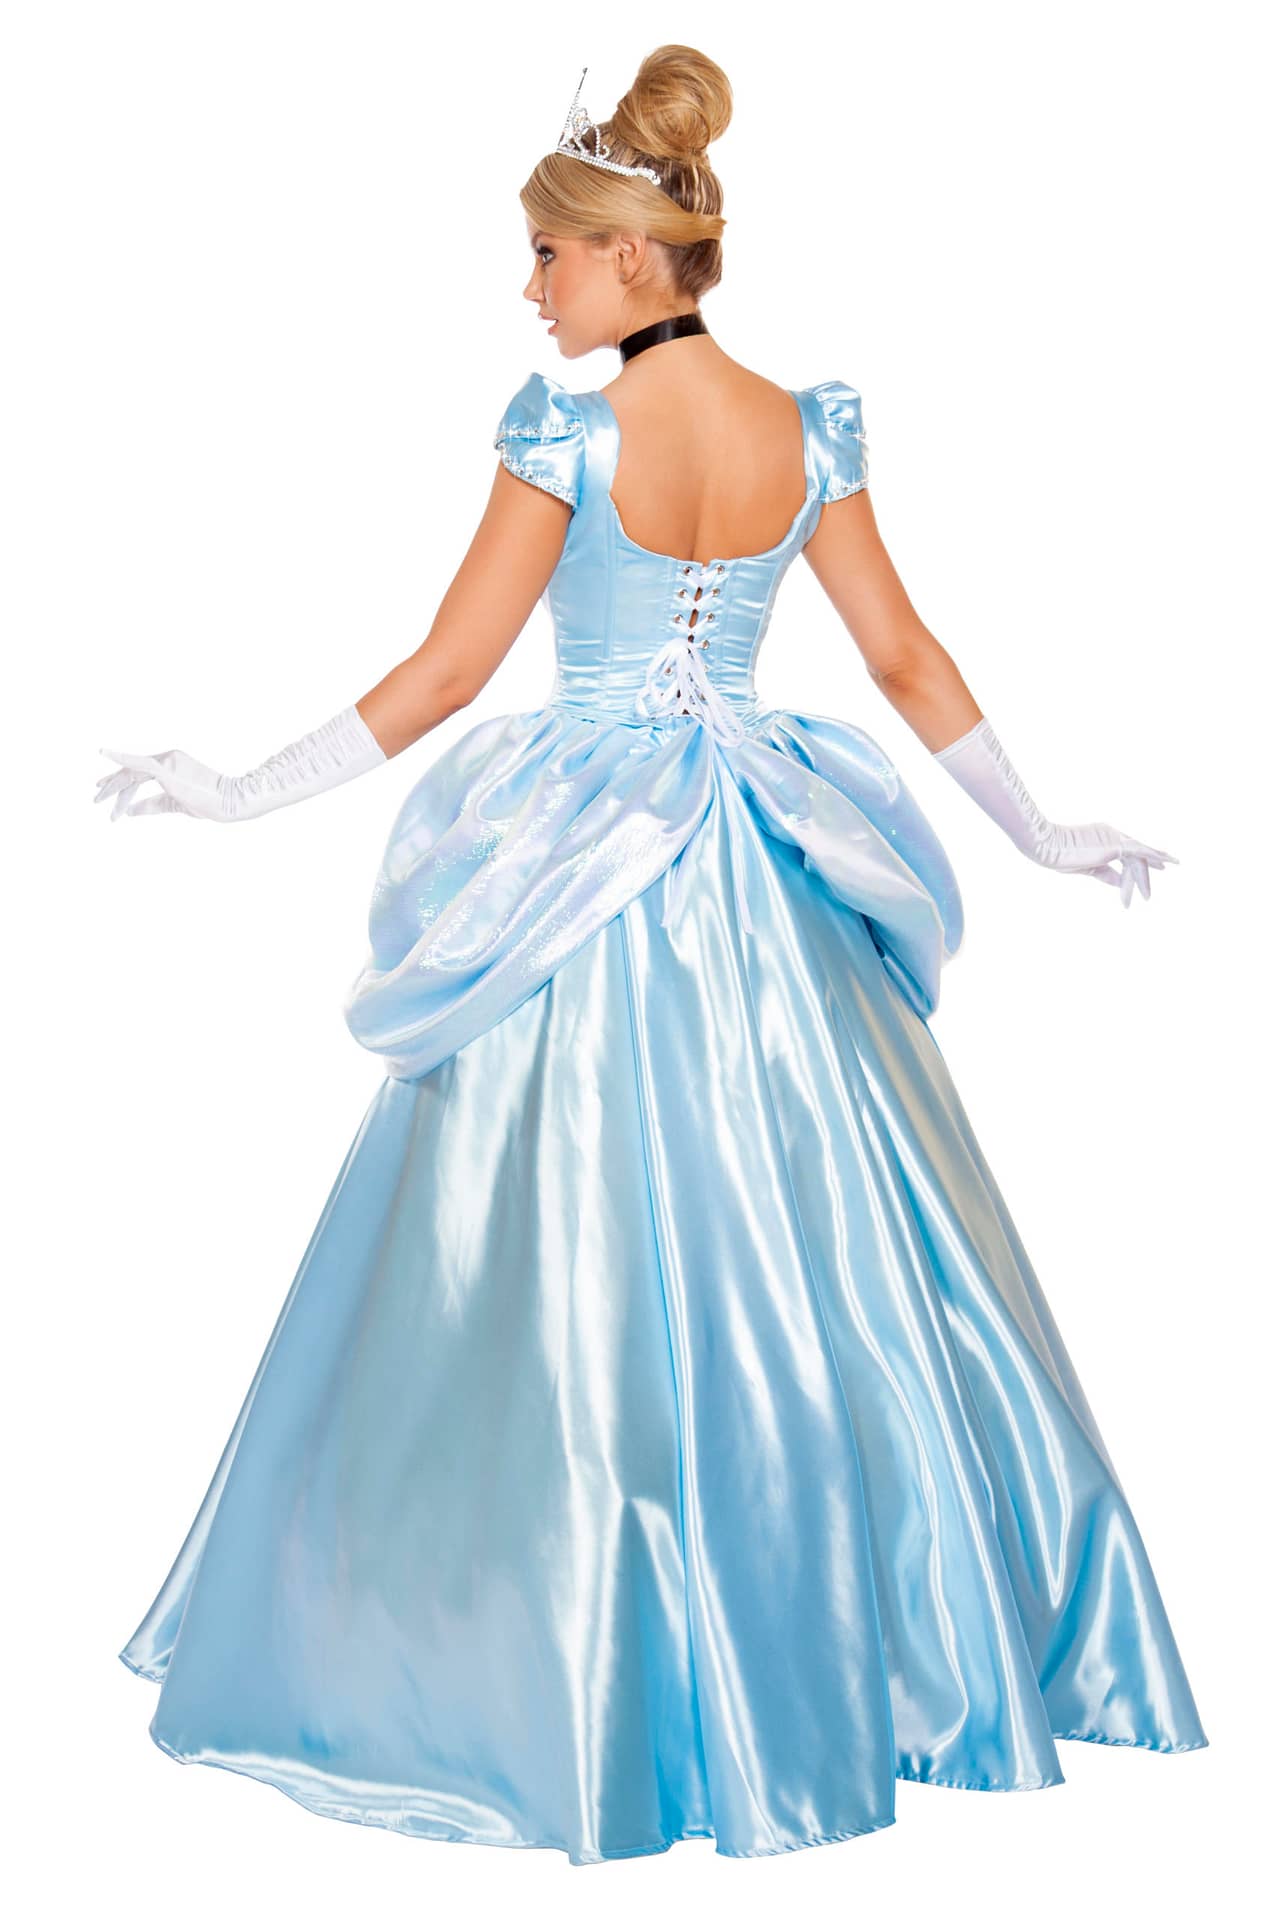 Stroke of Midnight Princess Gown – The BDSM Toy Shop